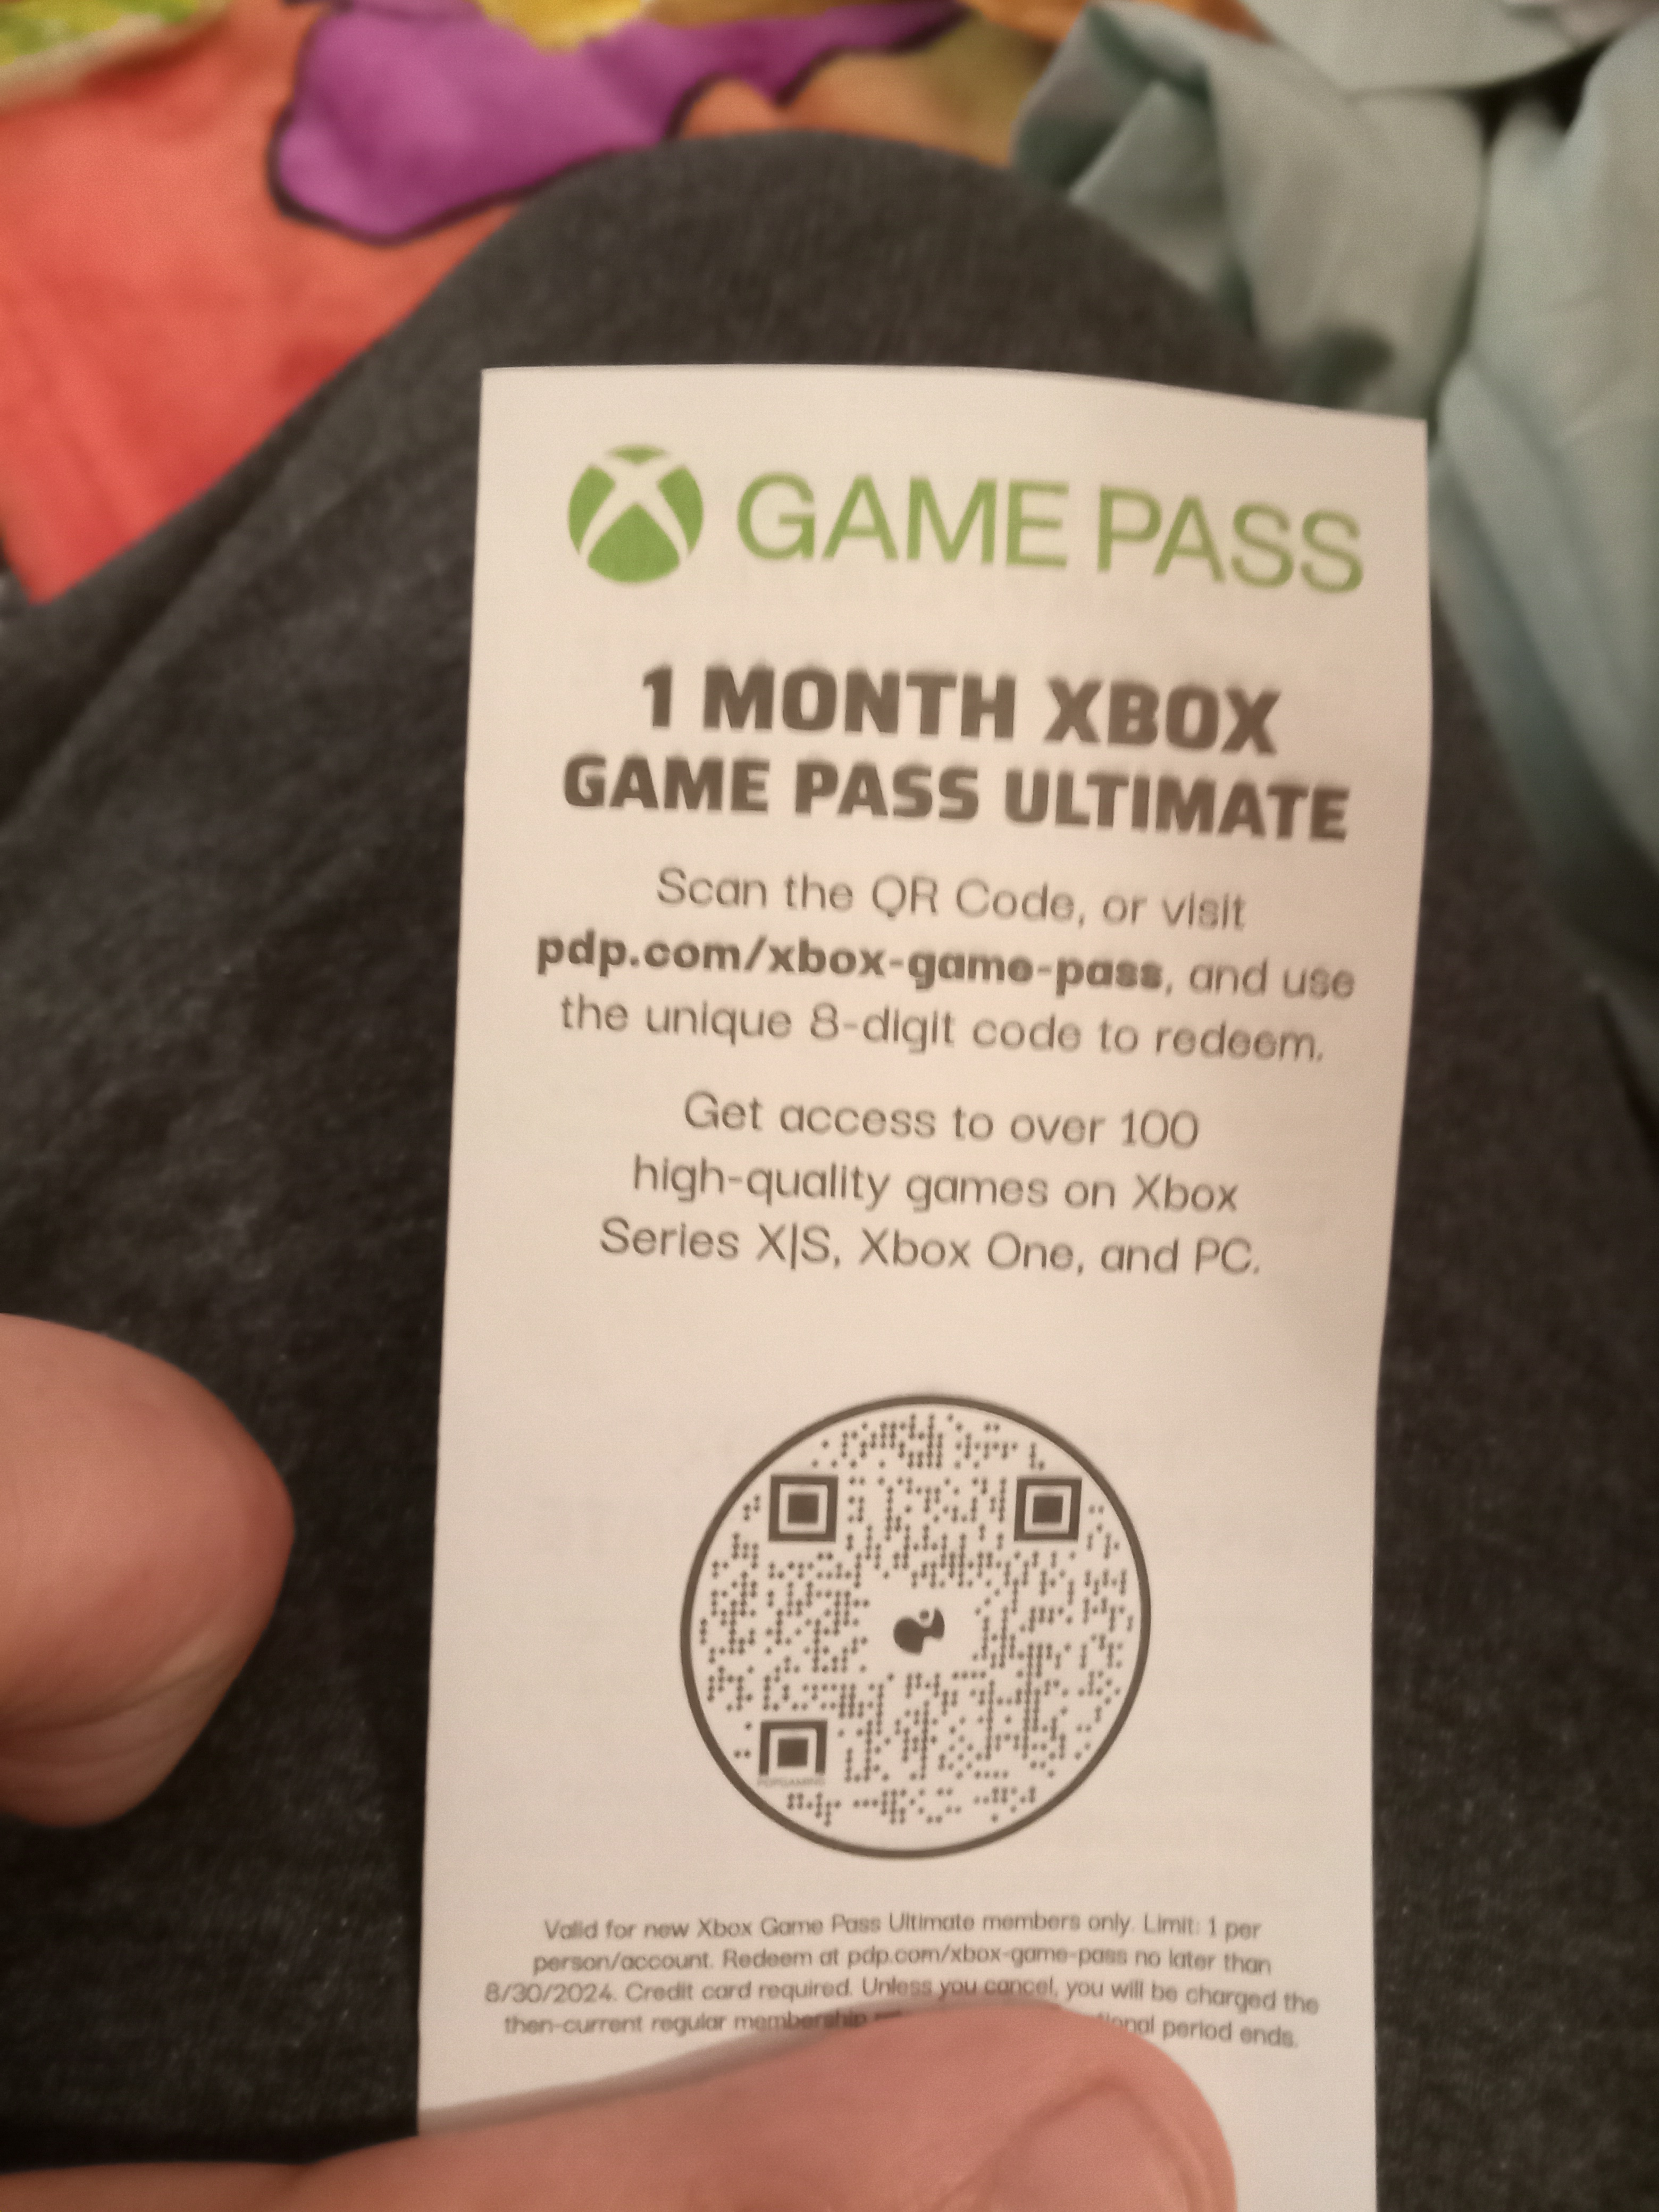 How to redeem a gift card or code for Xbox Game Pass Ultimate and Microsoft  365 